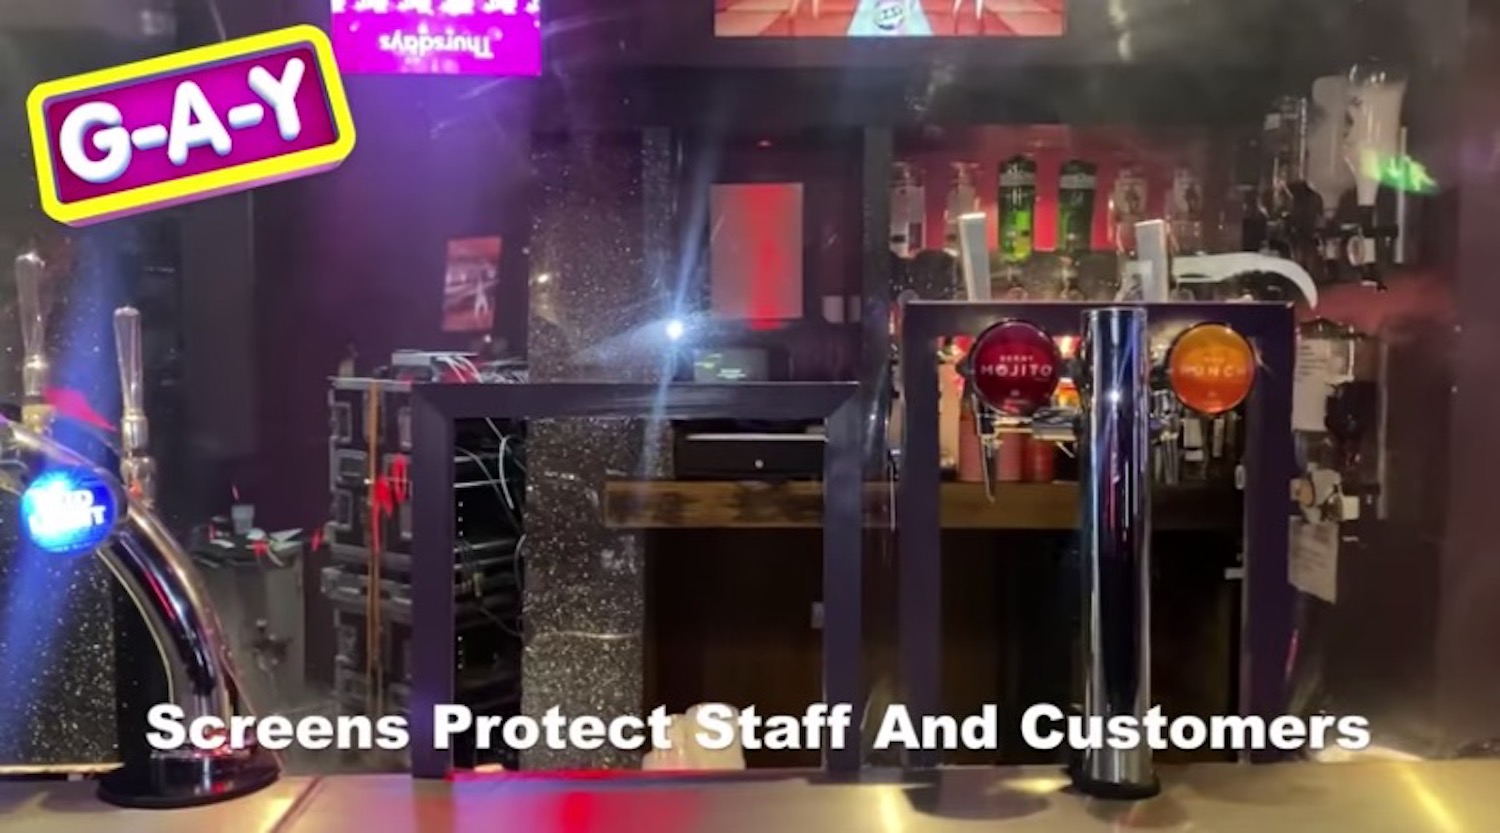 G-A-Y bar gives a tour around to show what drinks post-lockdown will look like